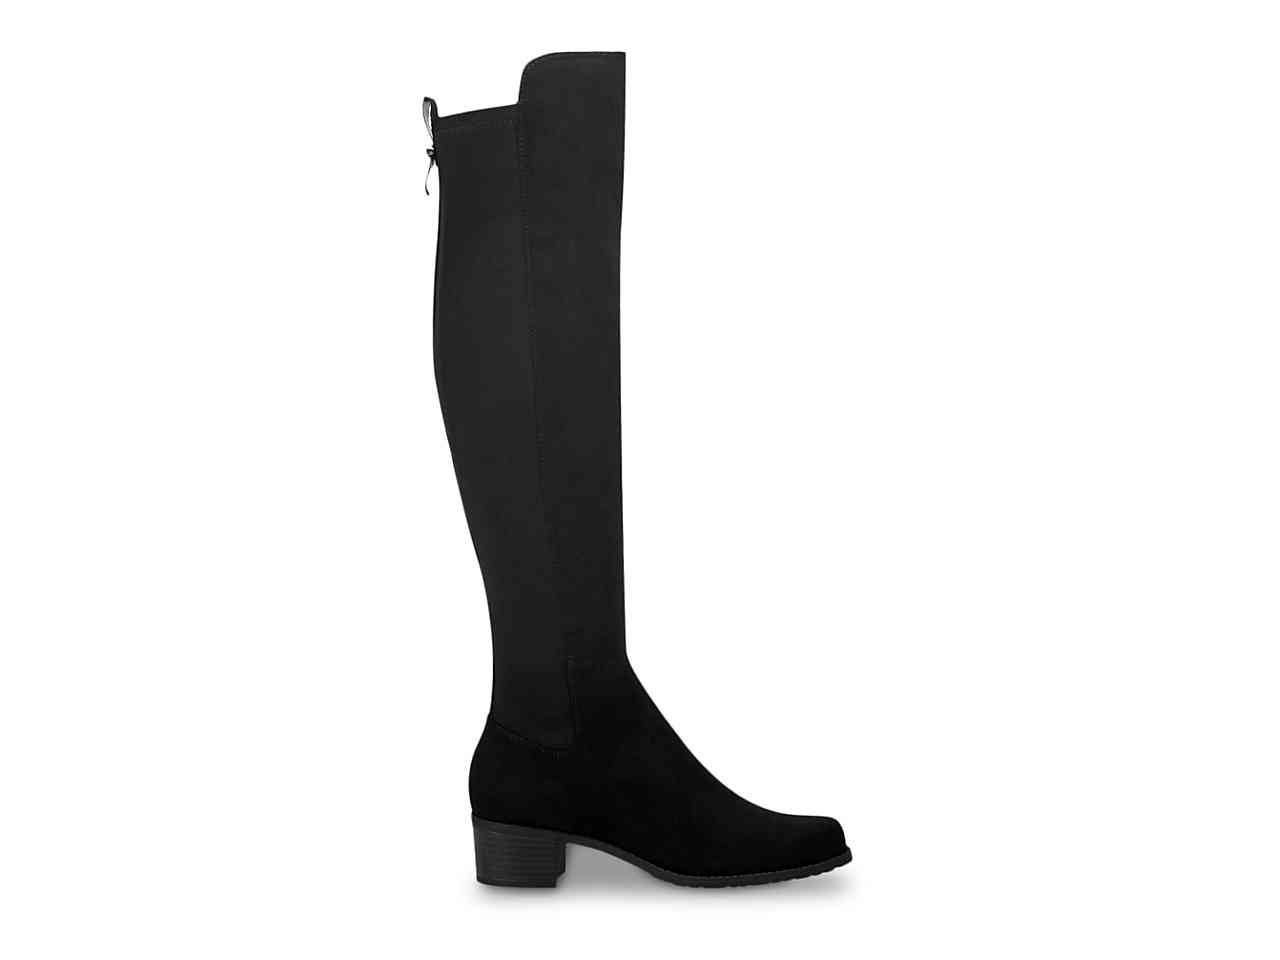 Best Over-The-Knee Wide Calf Boots For 